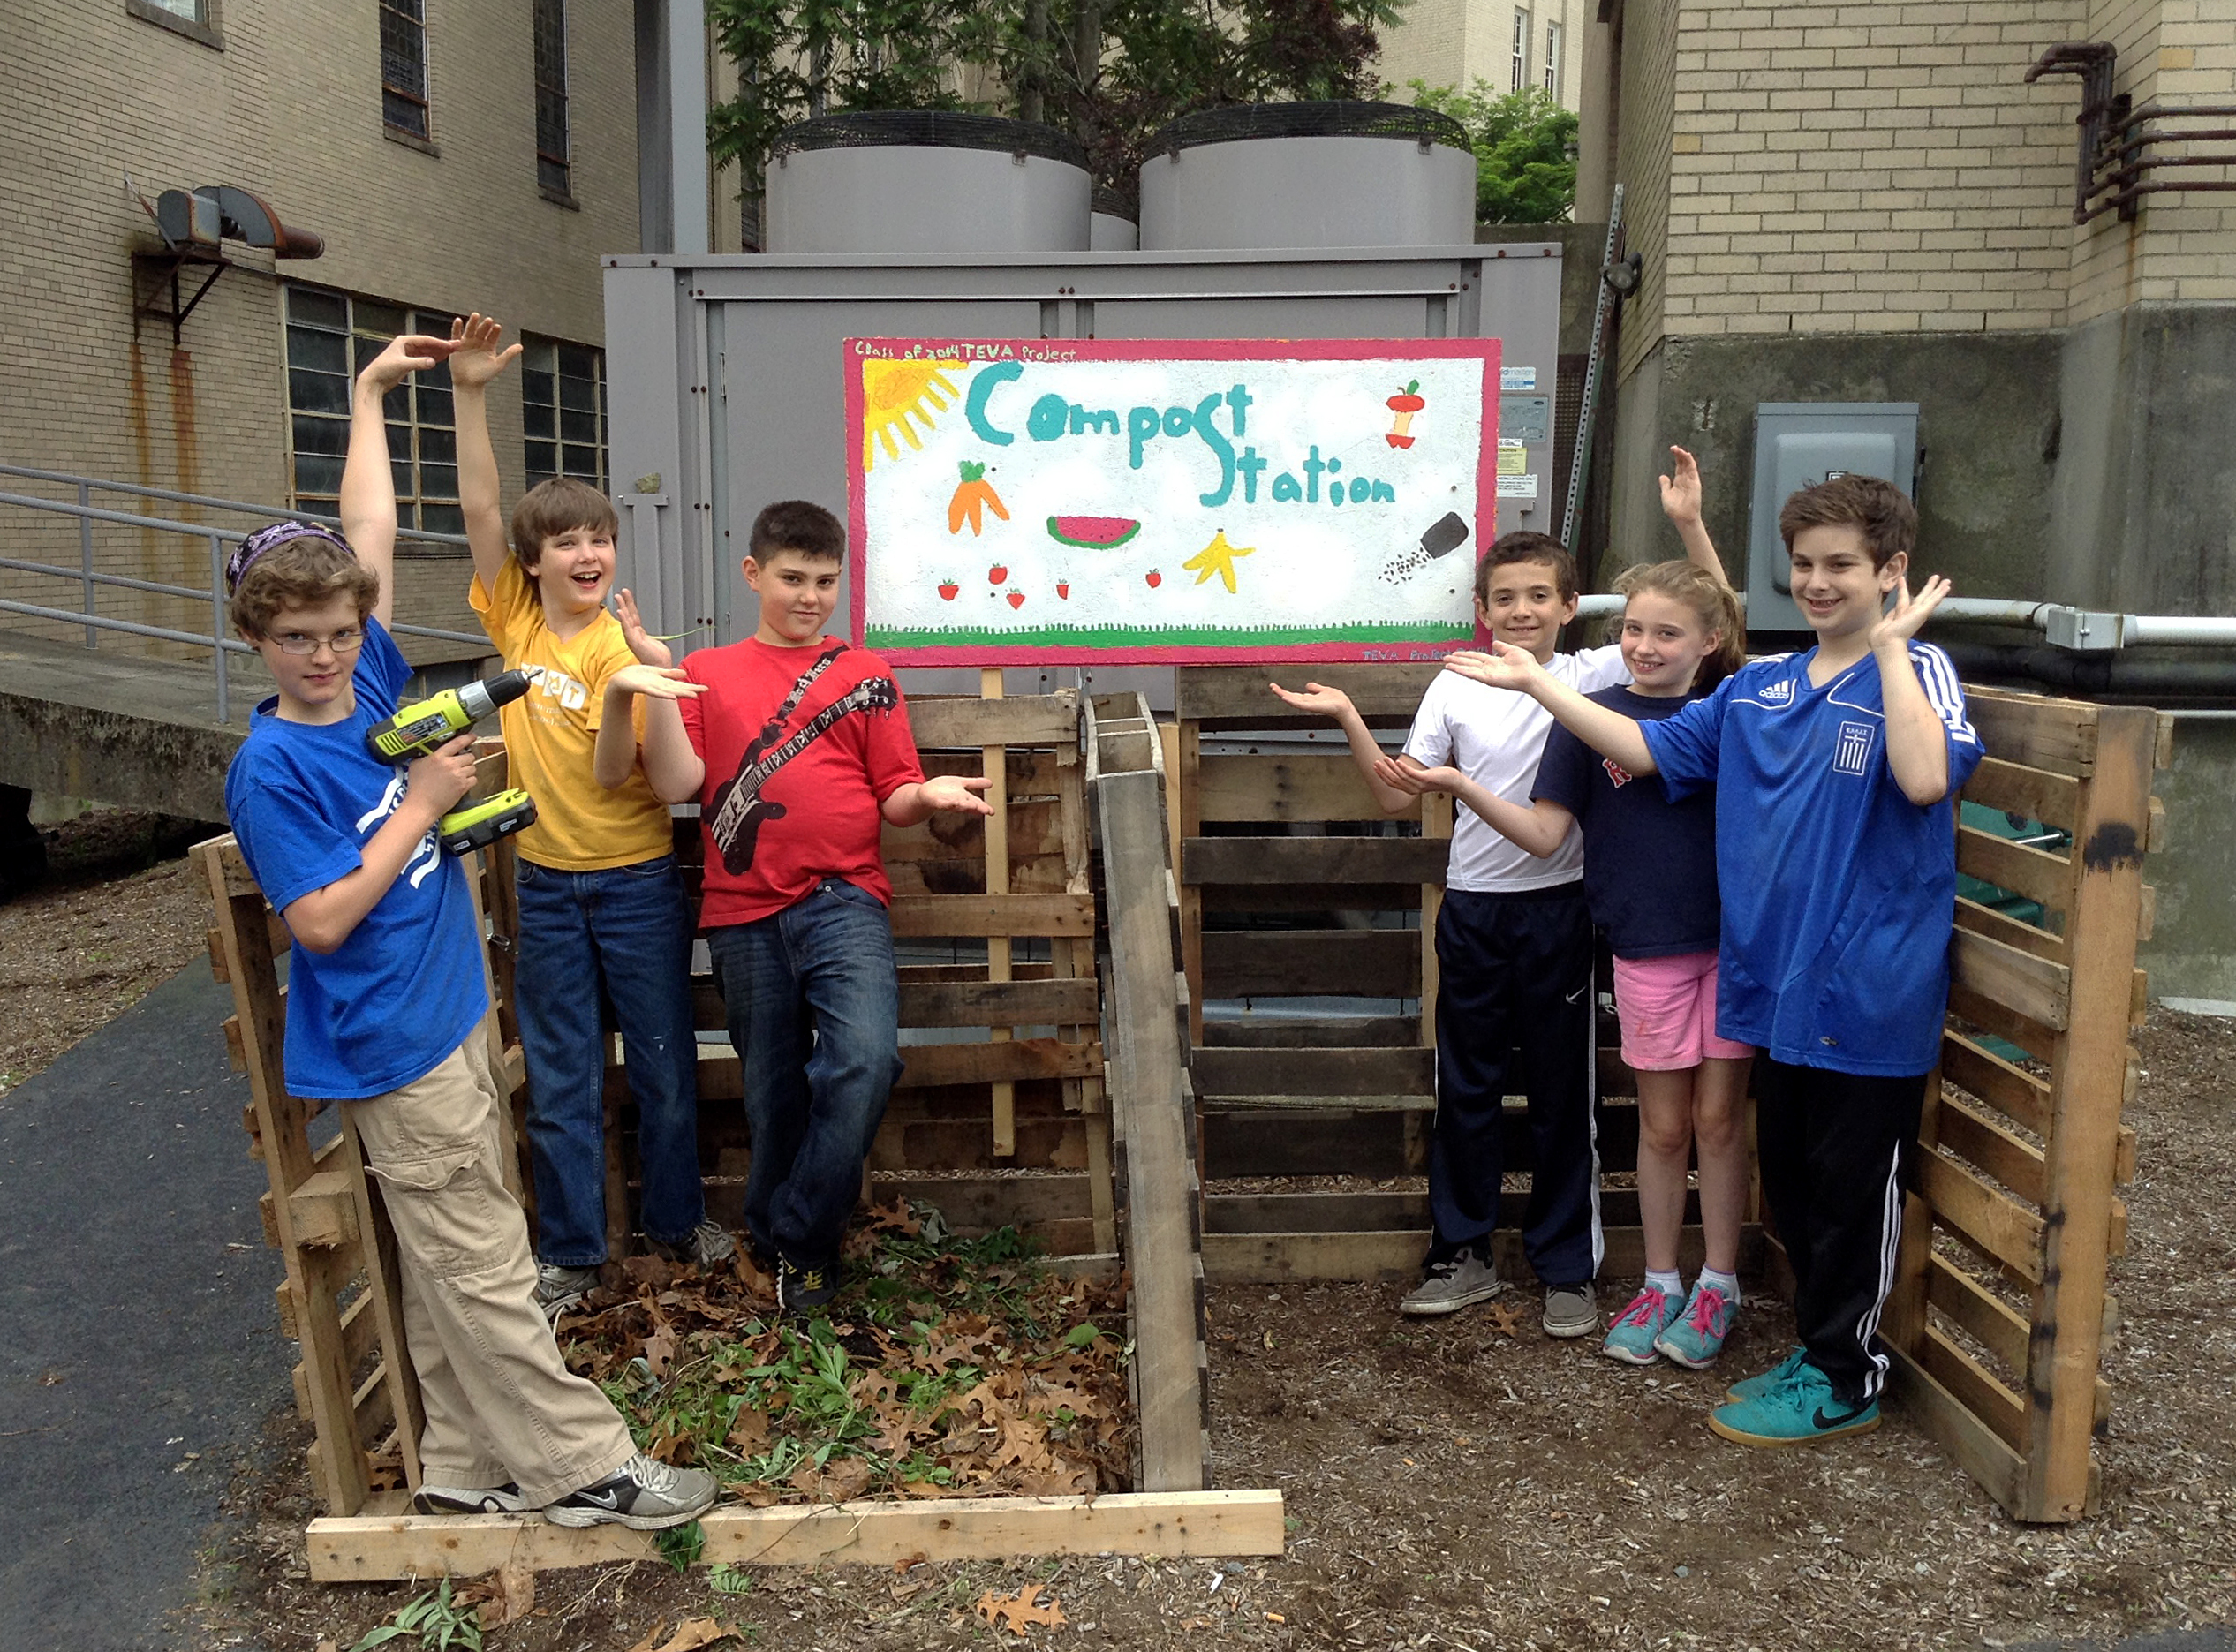 A compost station for organic waste created by fifth graders at the Jewish Community Day School of Rhode Island in Providence.